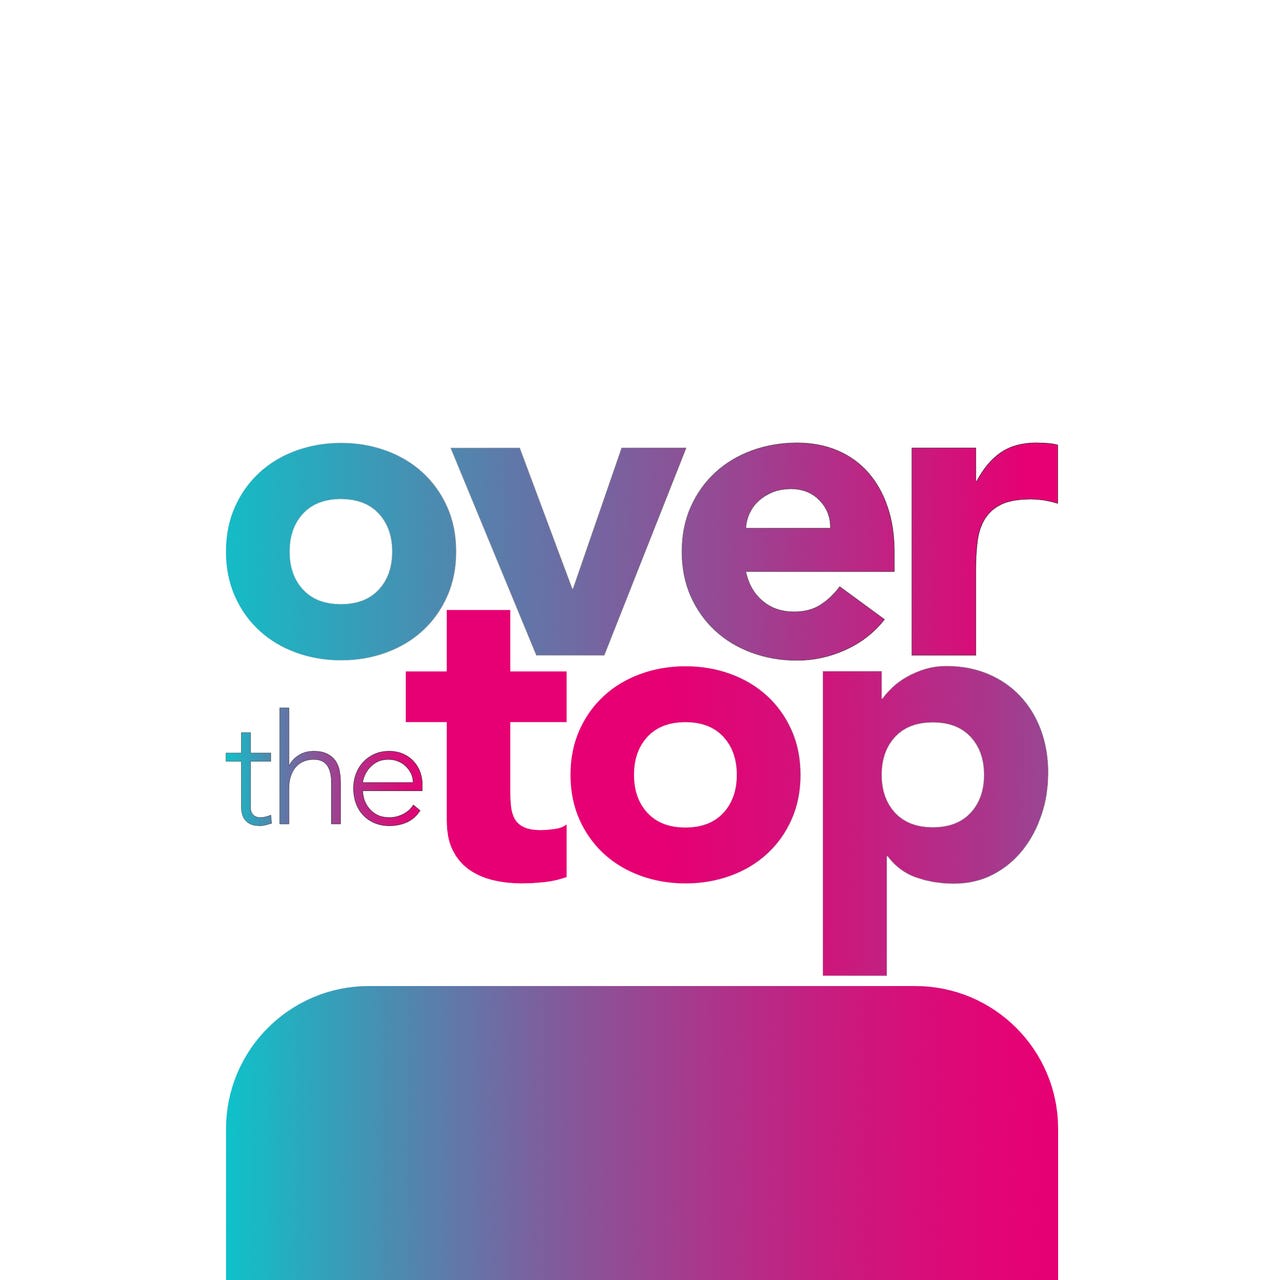 Artwork for Over the Top